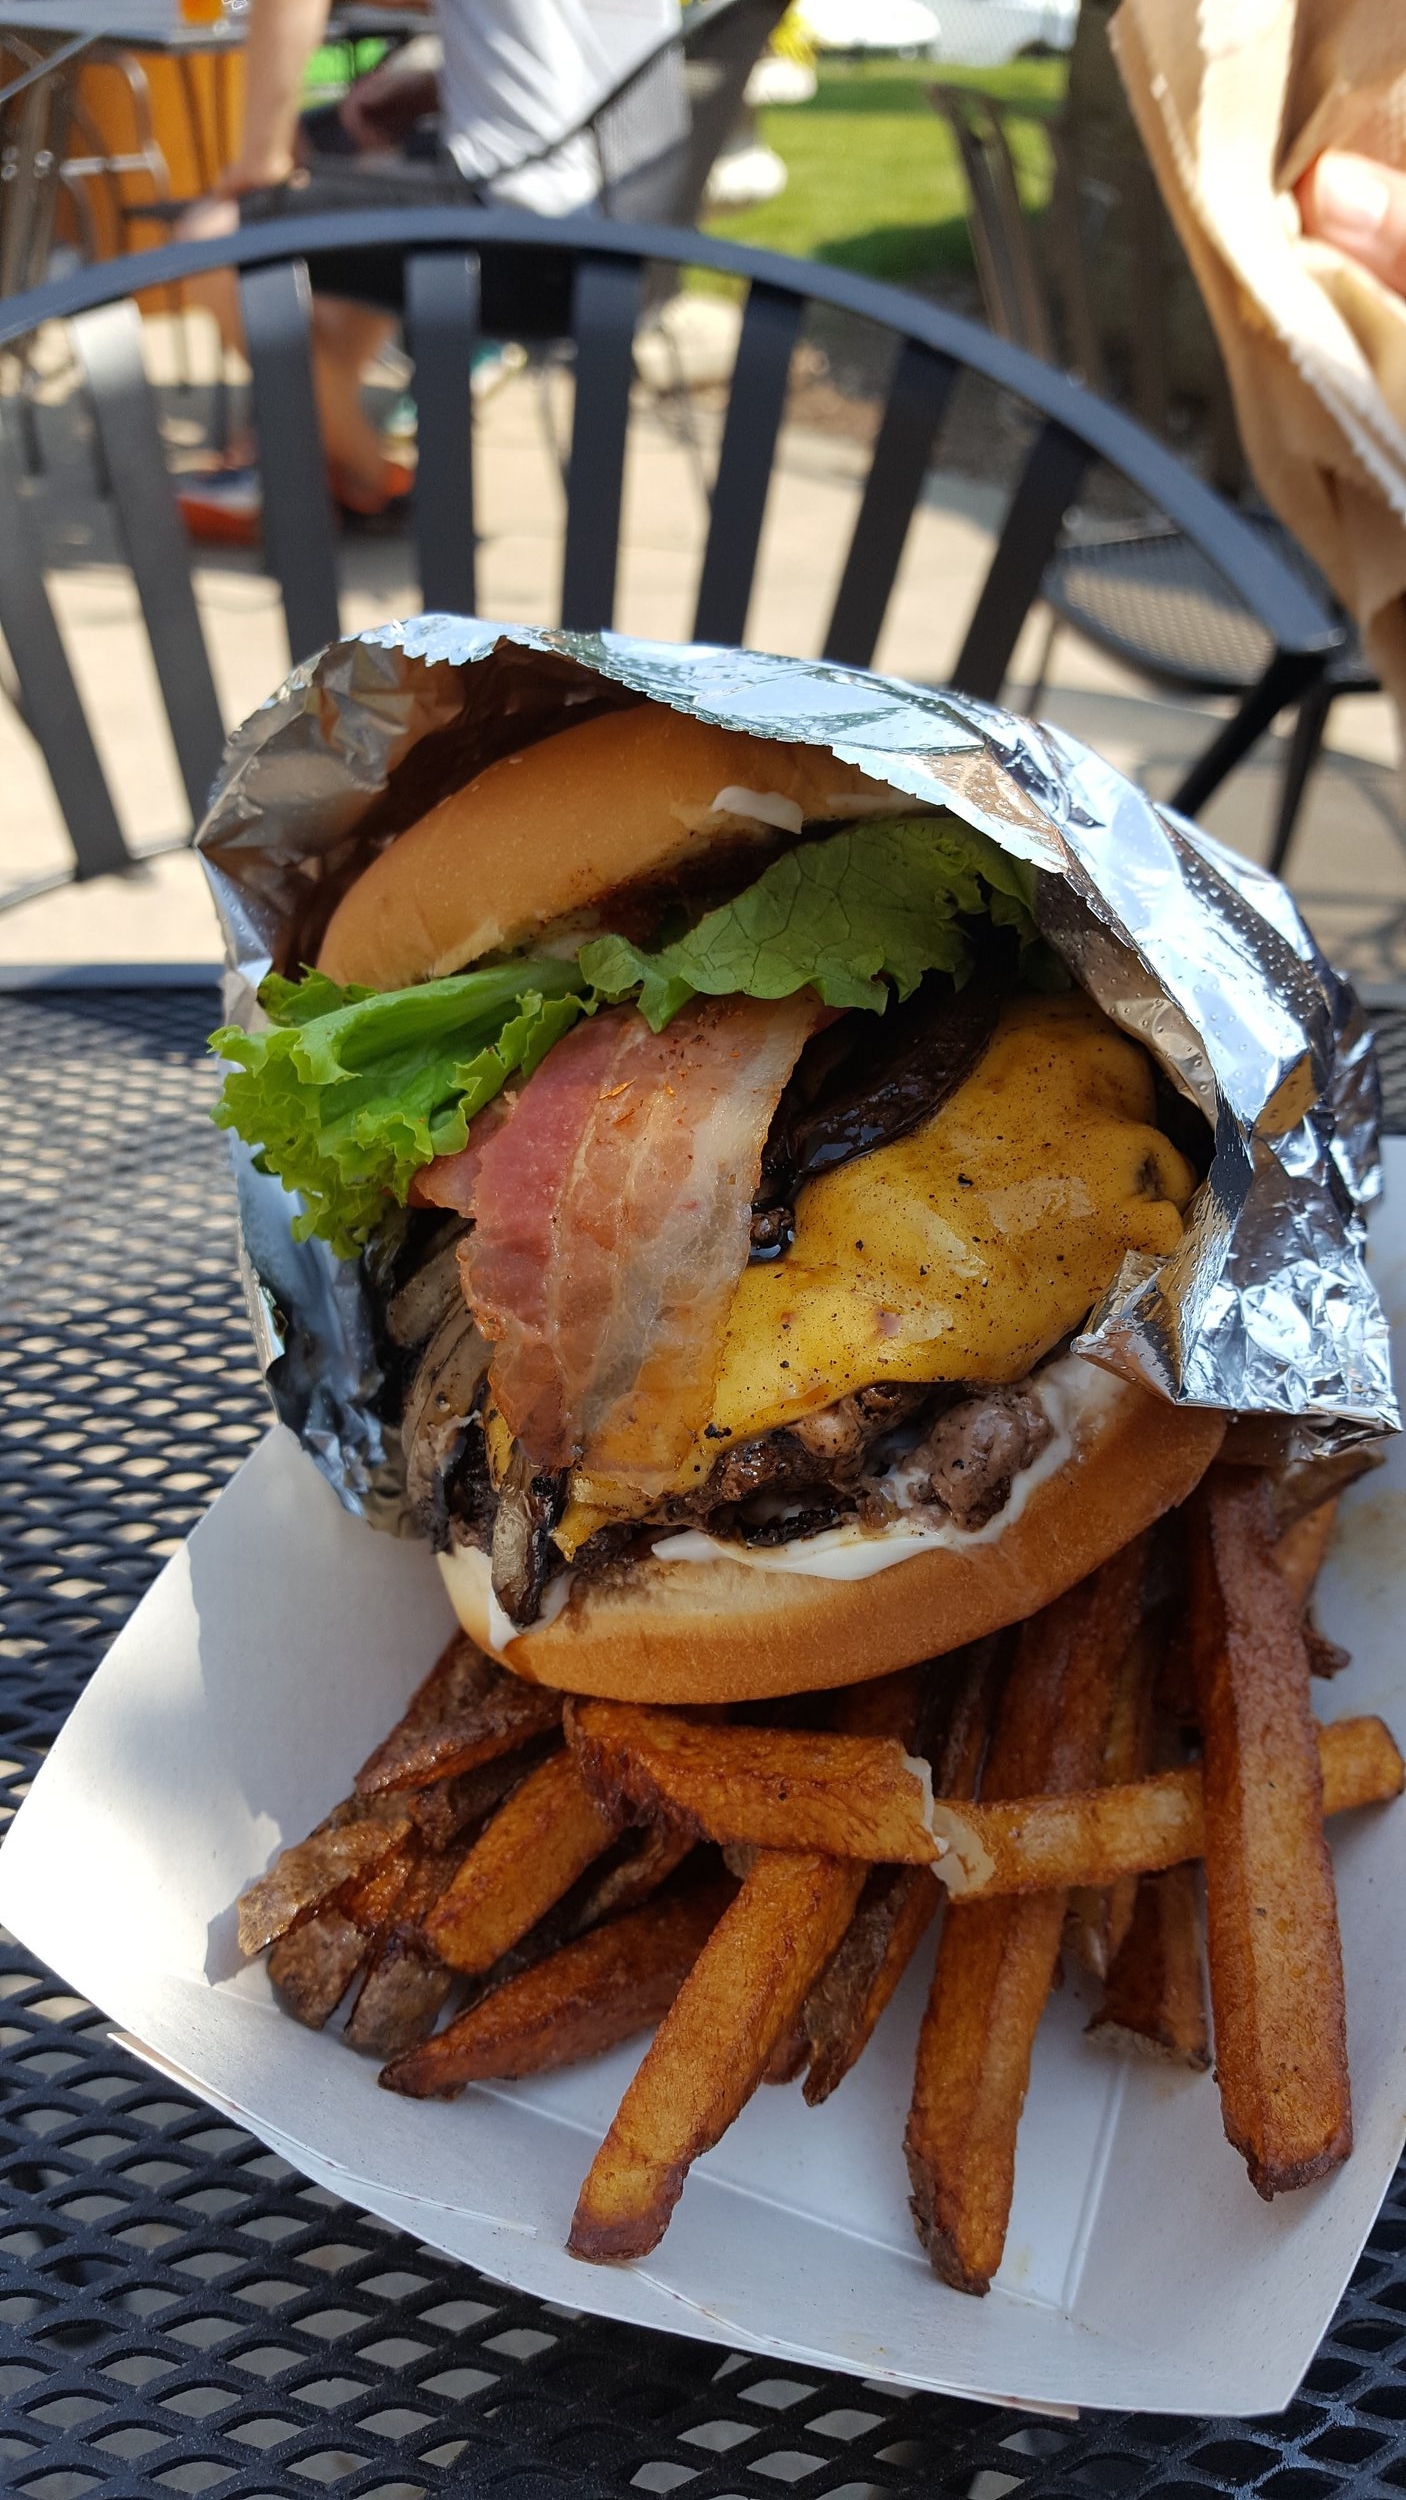  This burger looks like it ould take a bite out of you, so monstrous and tasty! 